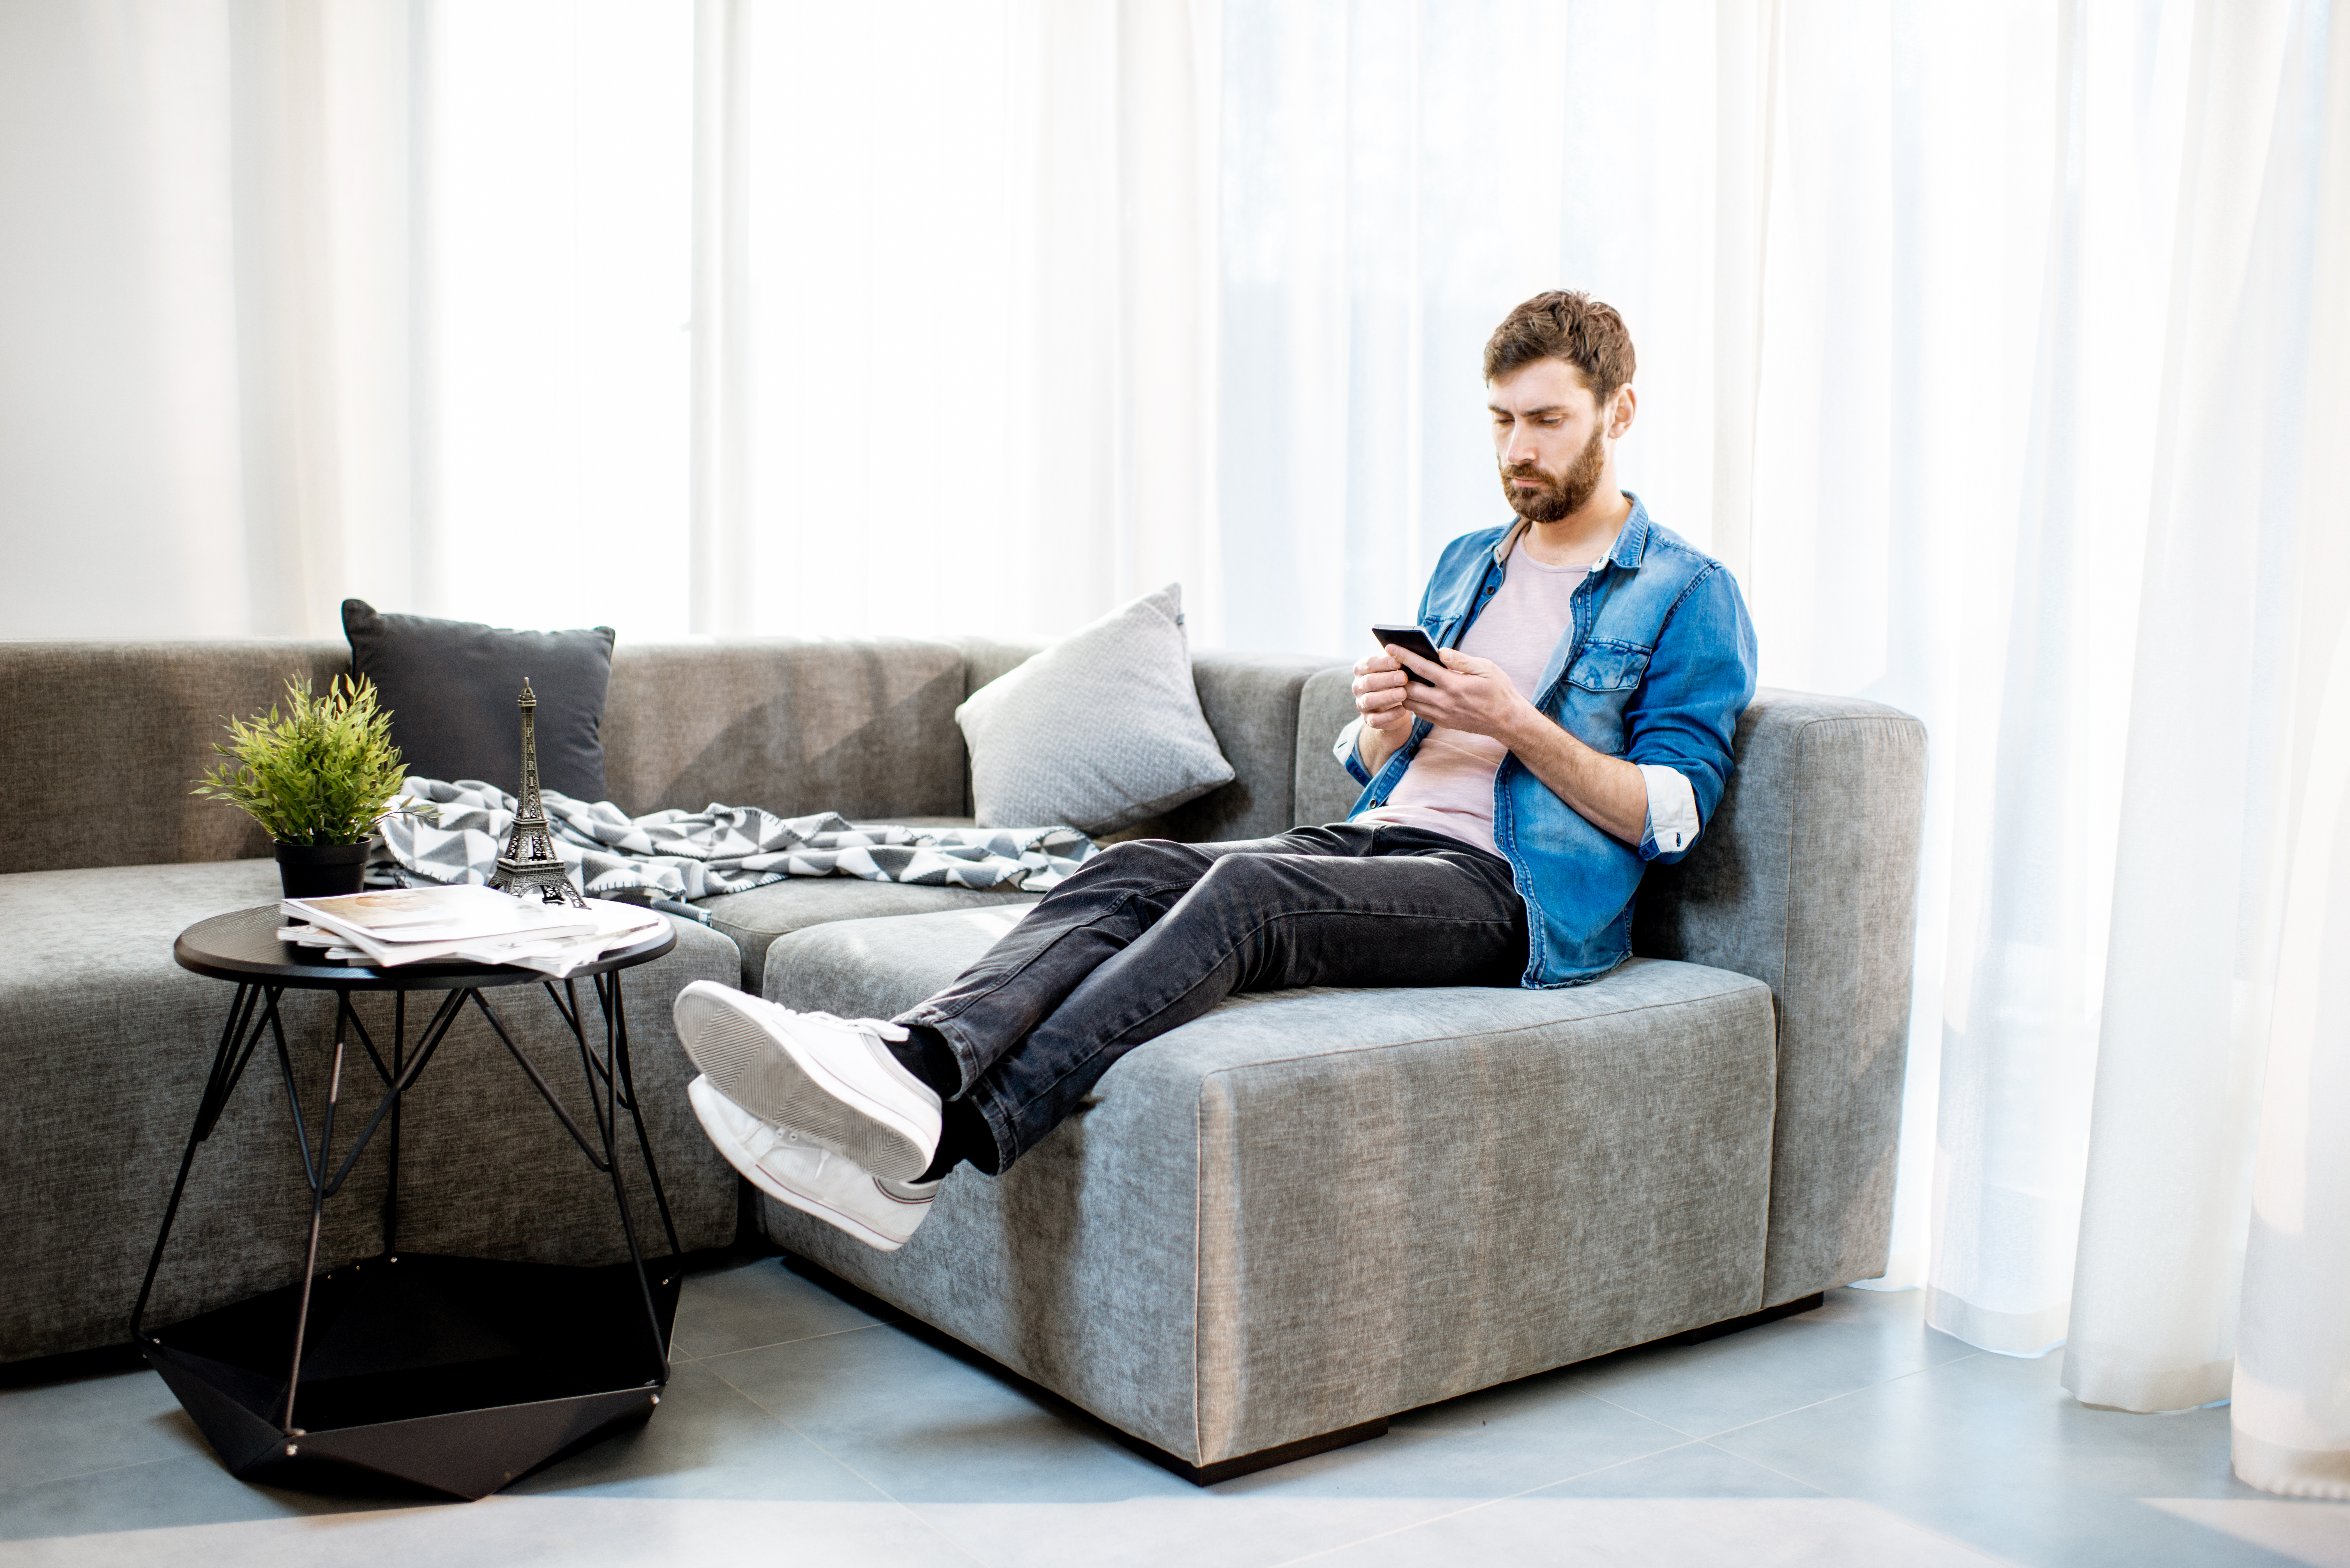 Man on the couch using phone at home